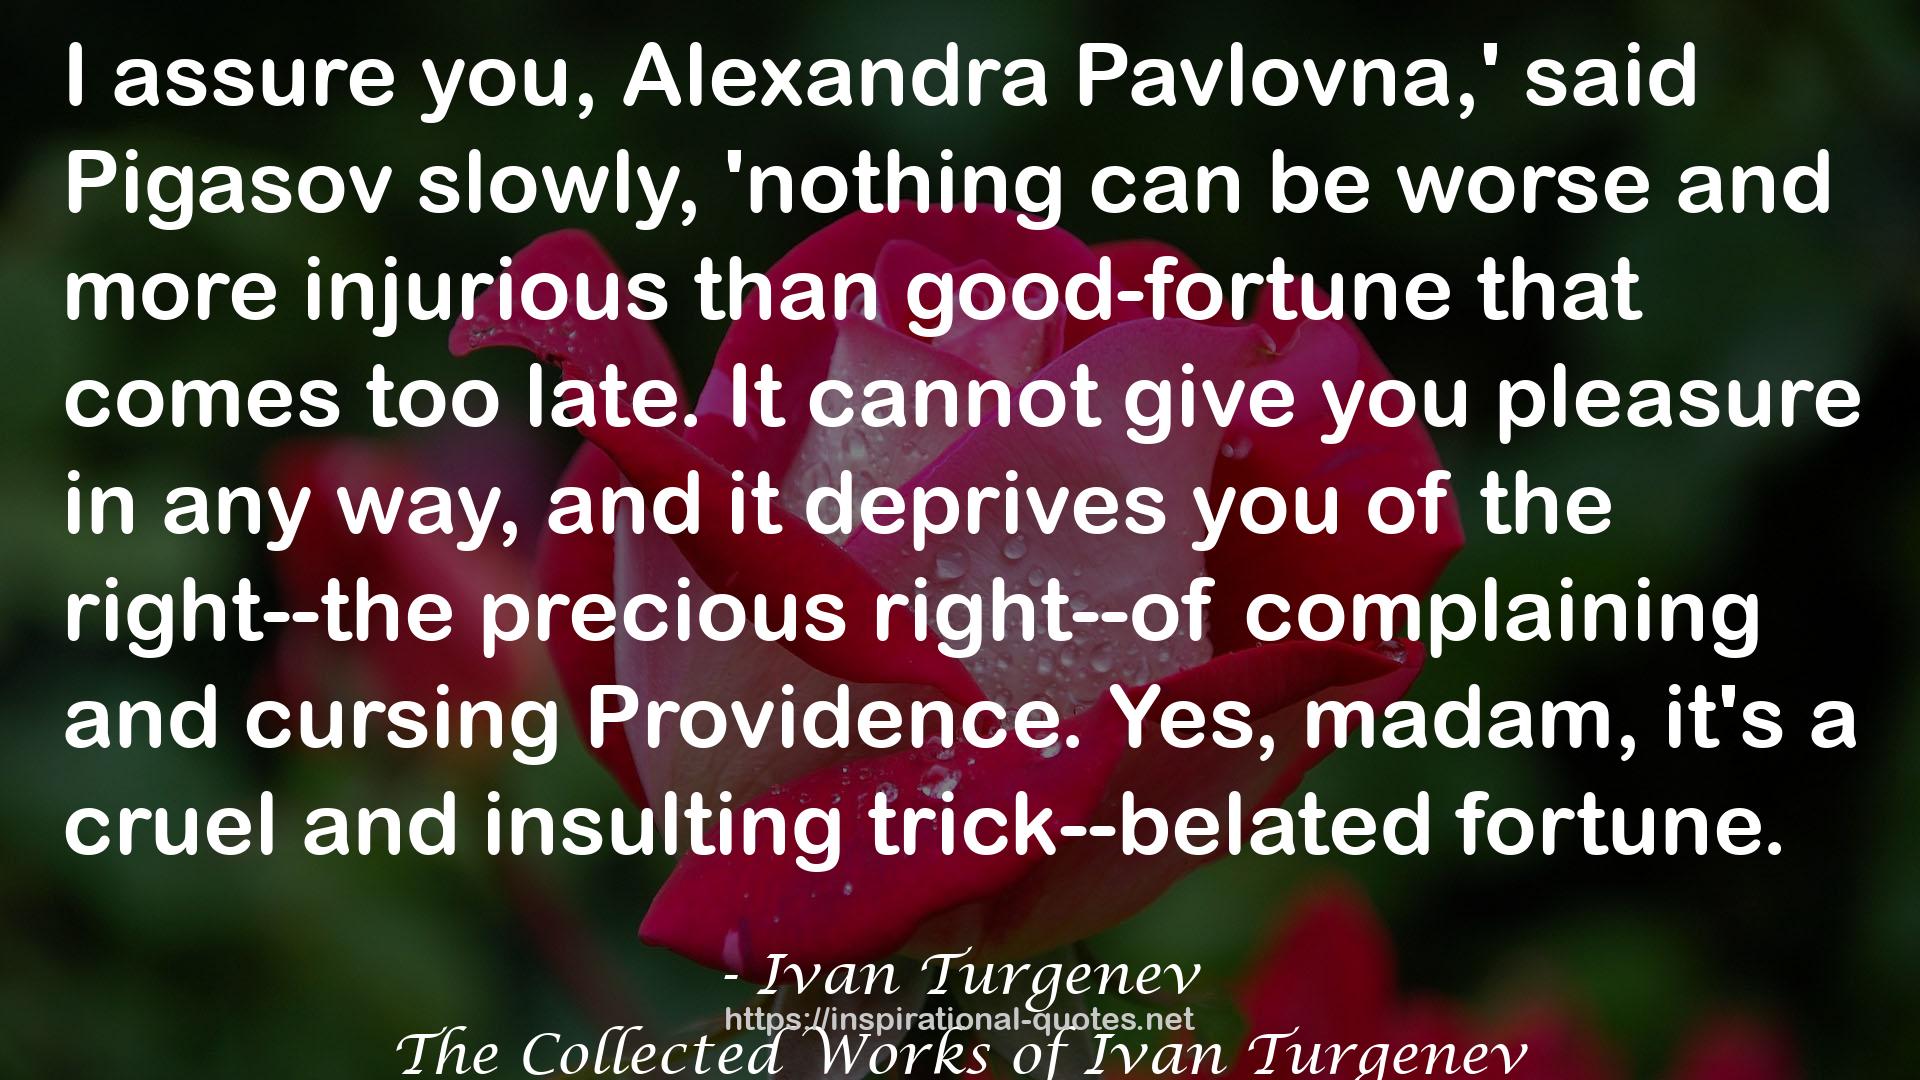 The Collected Works of Ivan Turgenev QUOTES